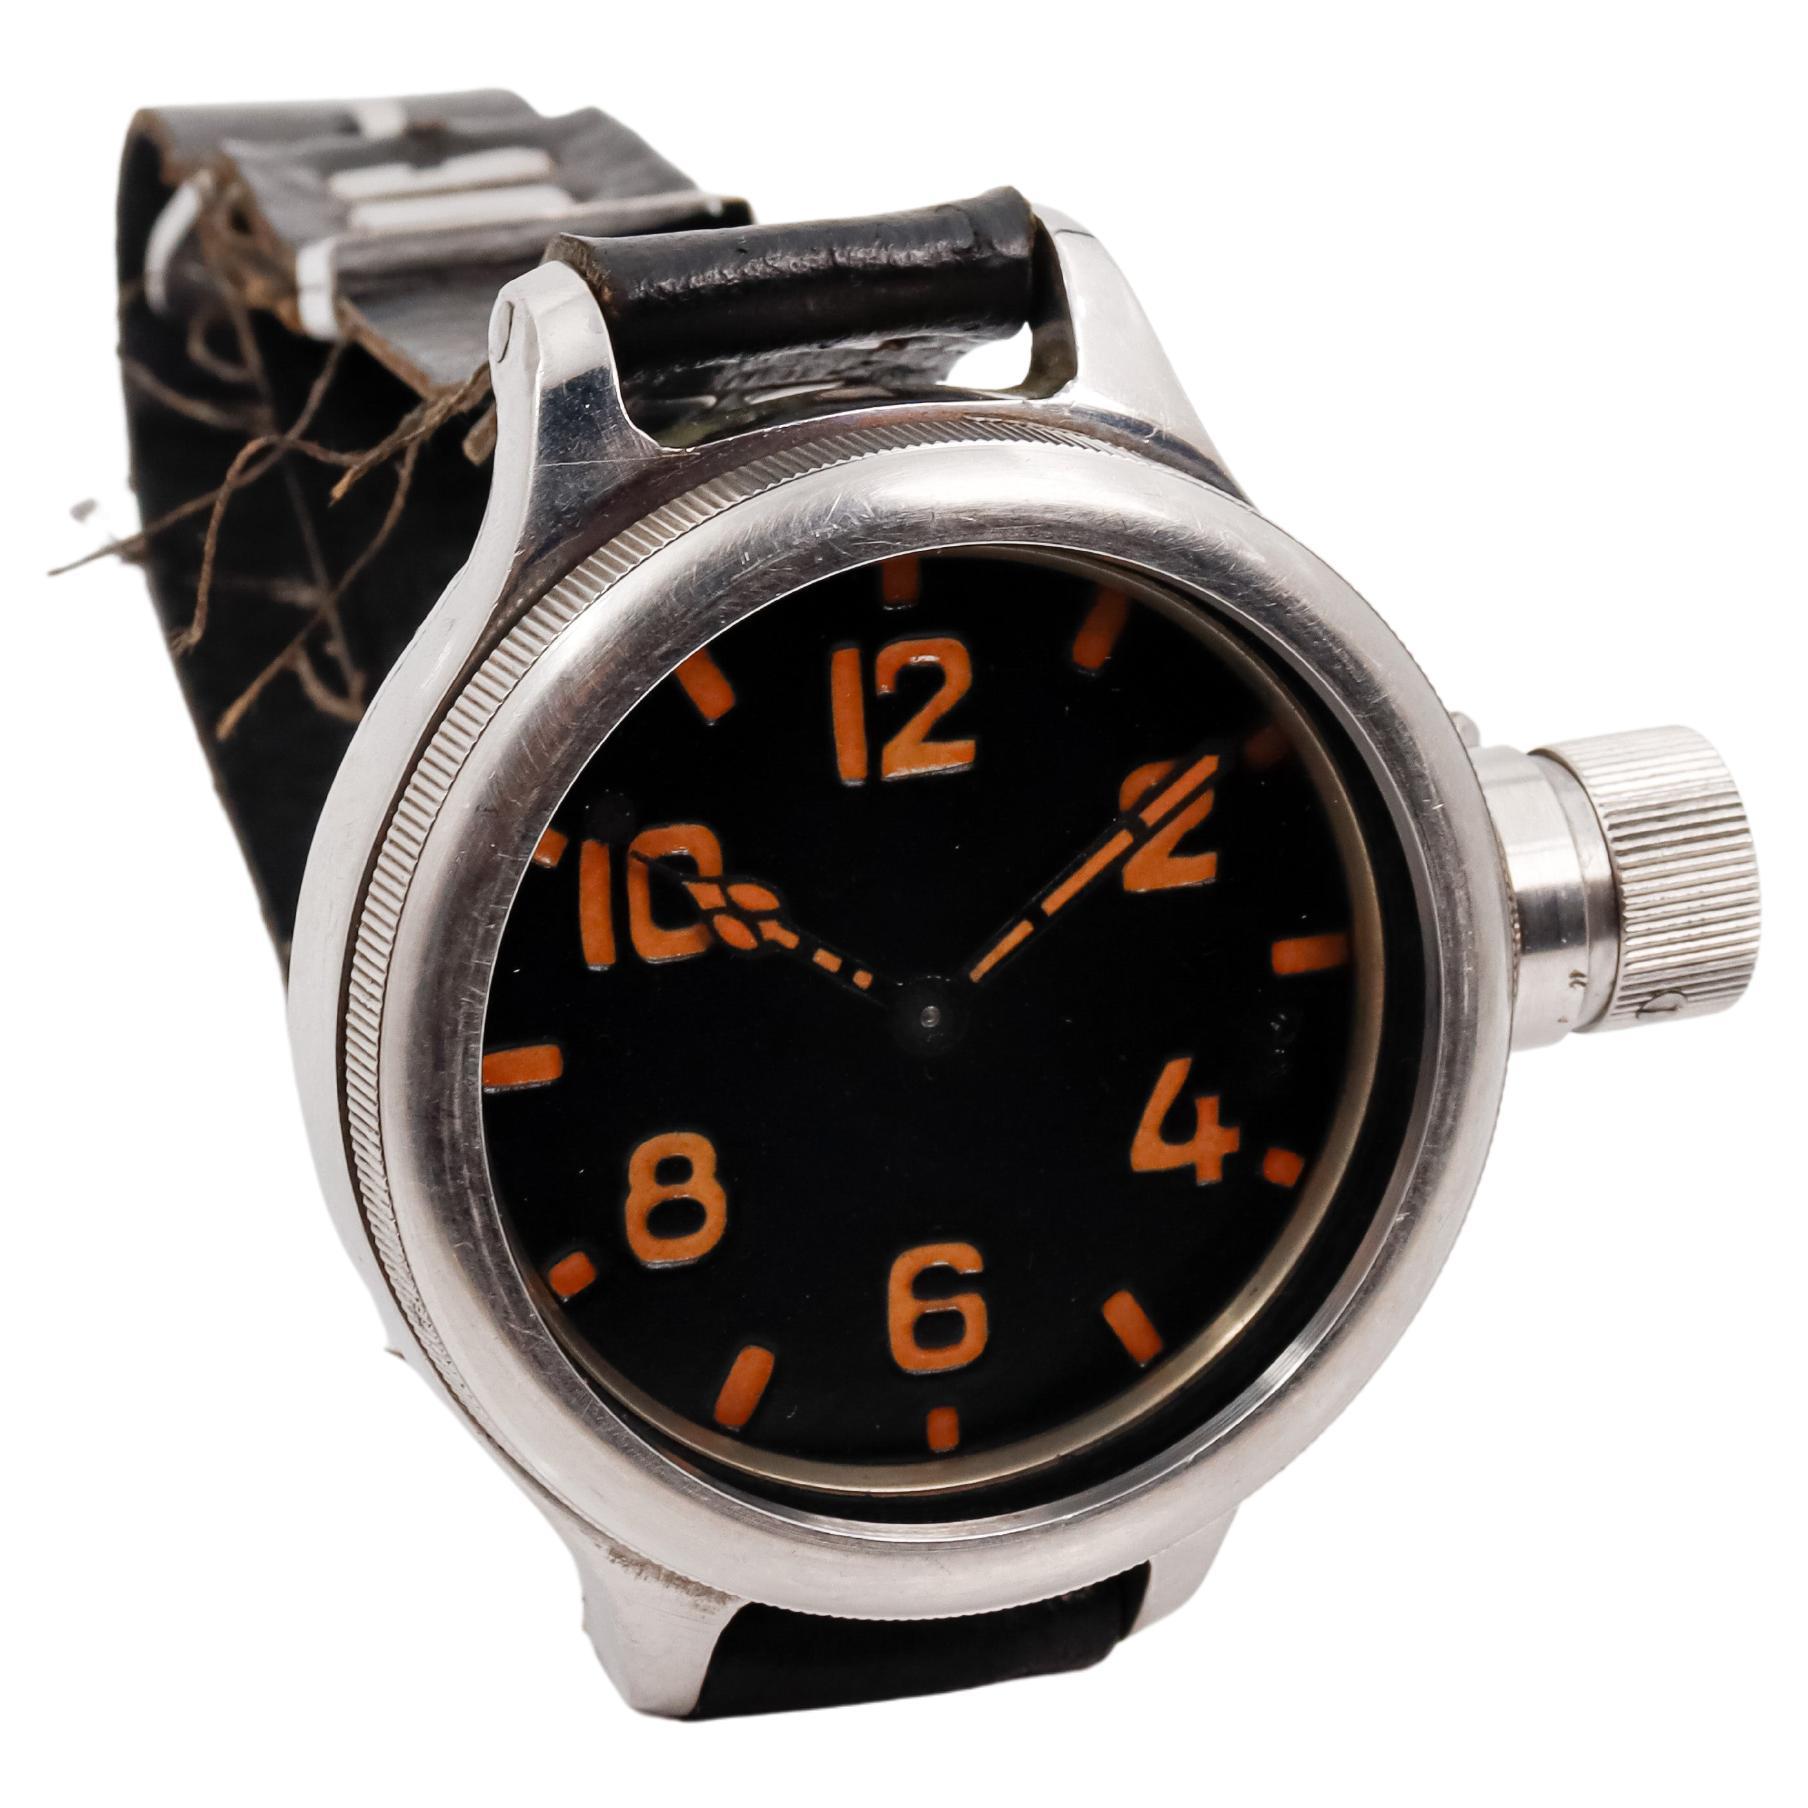 FACTORY / HOUSE: Russian by The Hampden Watch Company
STYLE / REFERENCE: Utilitarian Military Style
METAL / MATERIAL: Stainless Steel 
CIRCA / YEAR: 1950's
DIMENSIONS / SIZE: Length 77mm X Diameter 60mm
MOVEMENT / CALIBER:  Manual Winding /  15